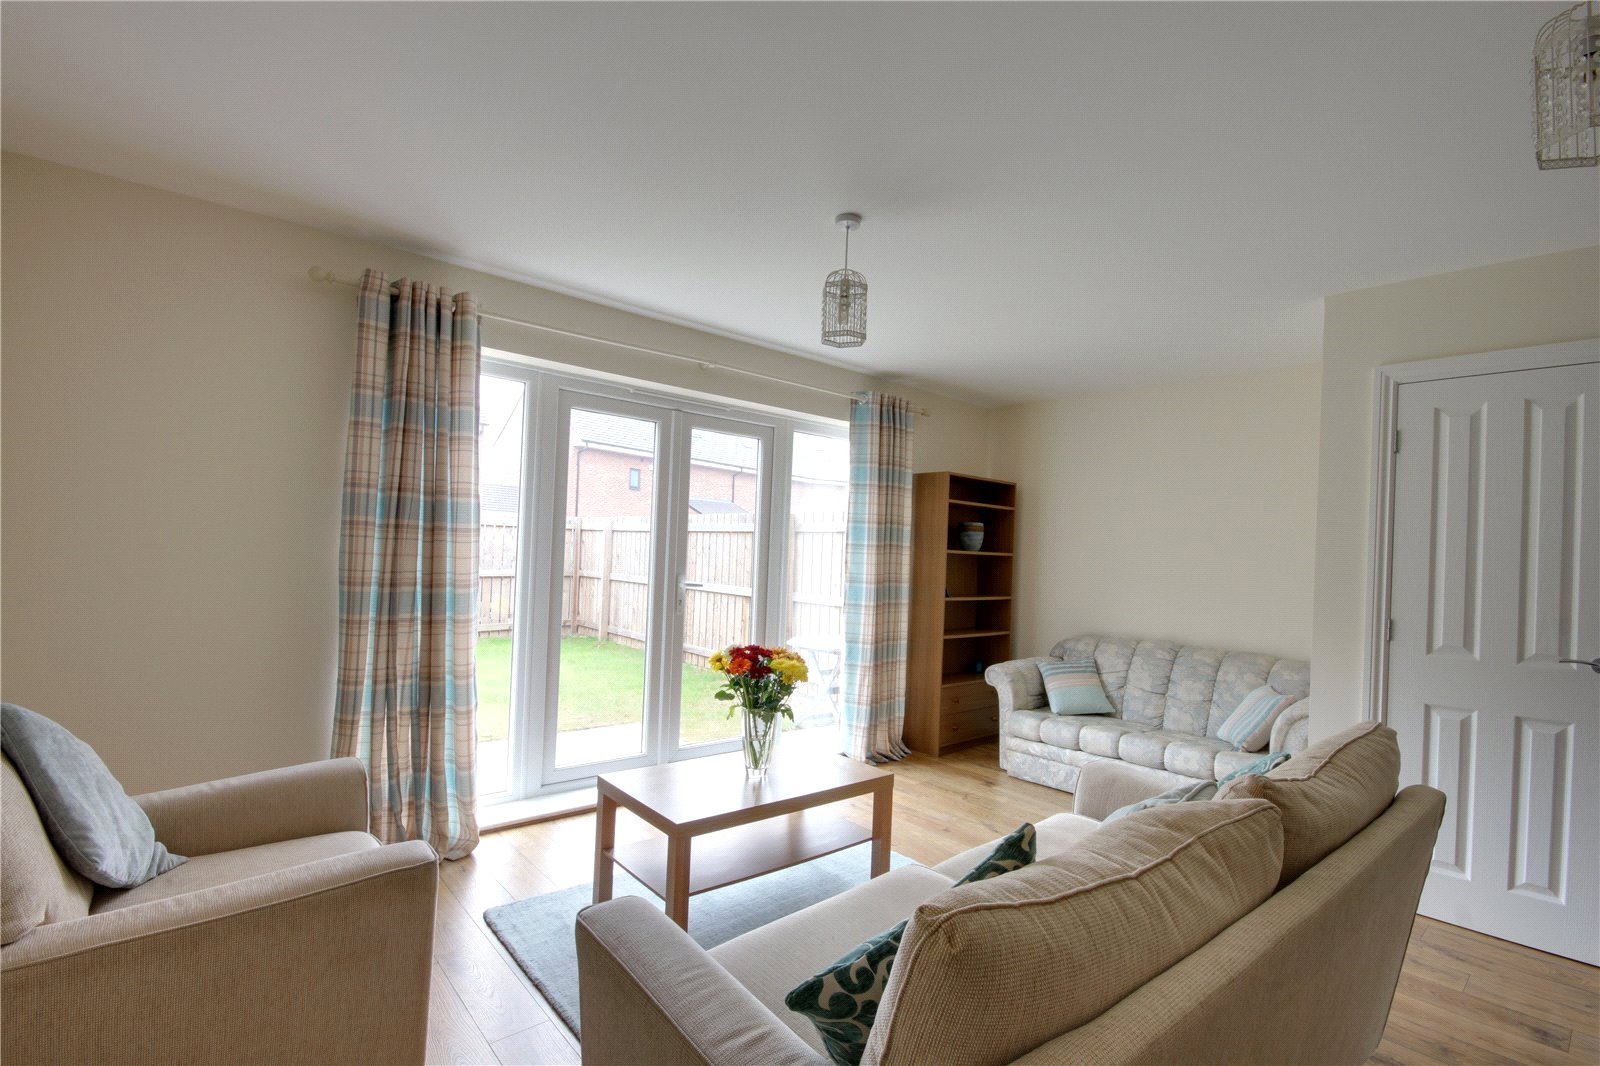 3 bed house for sale in Dorado Close, Stockton-on-Tees  - Property Image 3